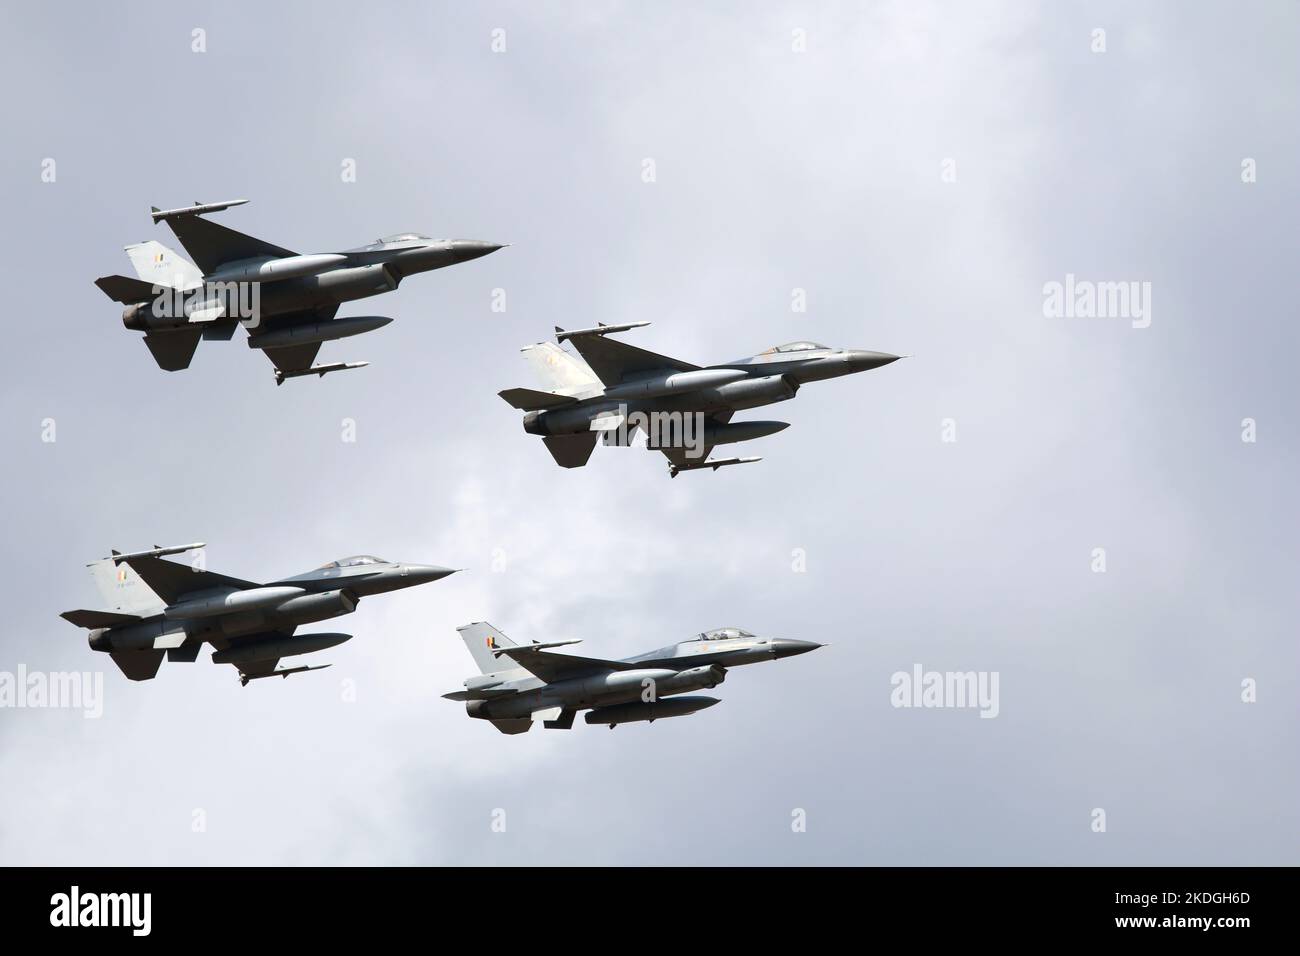 Kleine Brogel, Belgium - SEP 08, 2018: formation of Belgium F-16 fighter jets flying through the sky. Military aircraft formation flying. Stock Photo